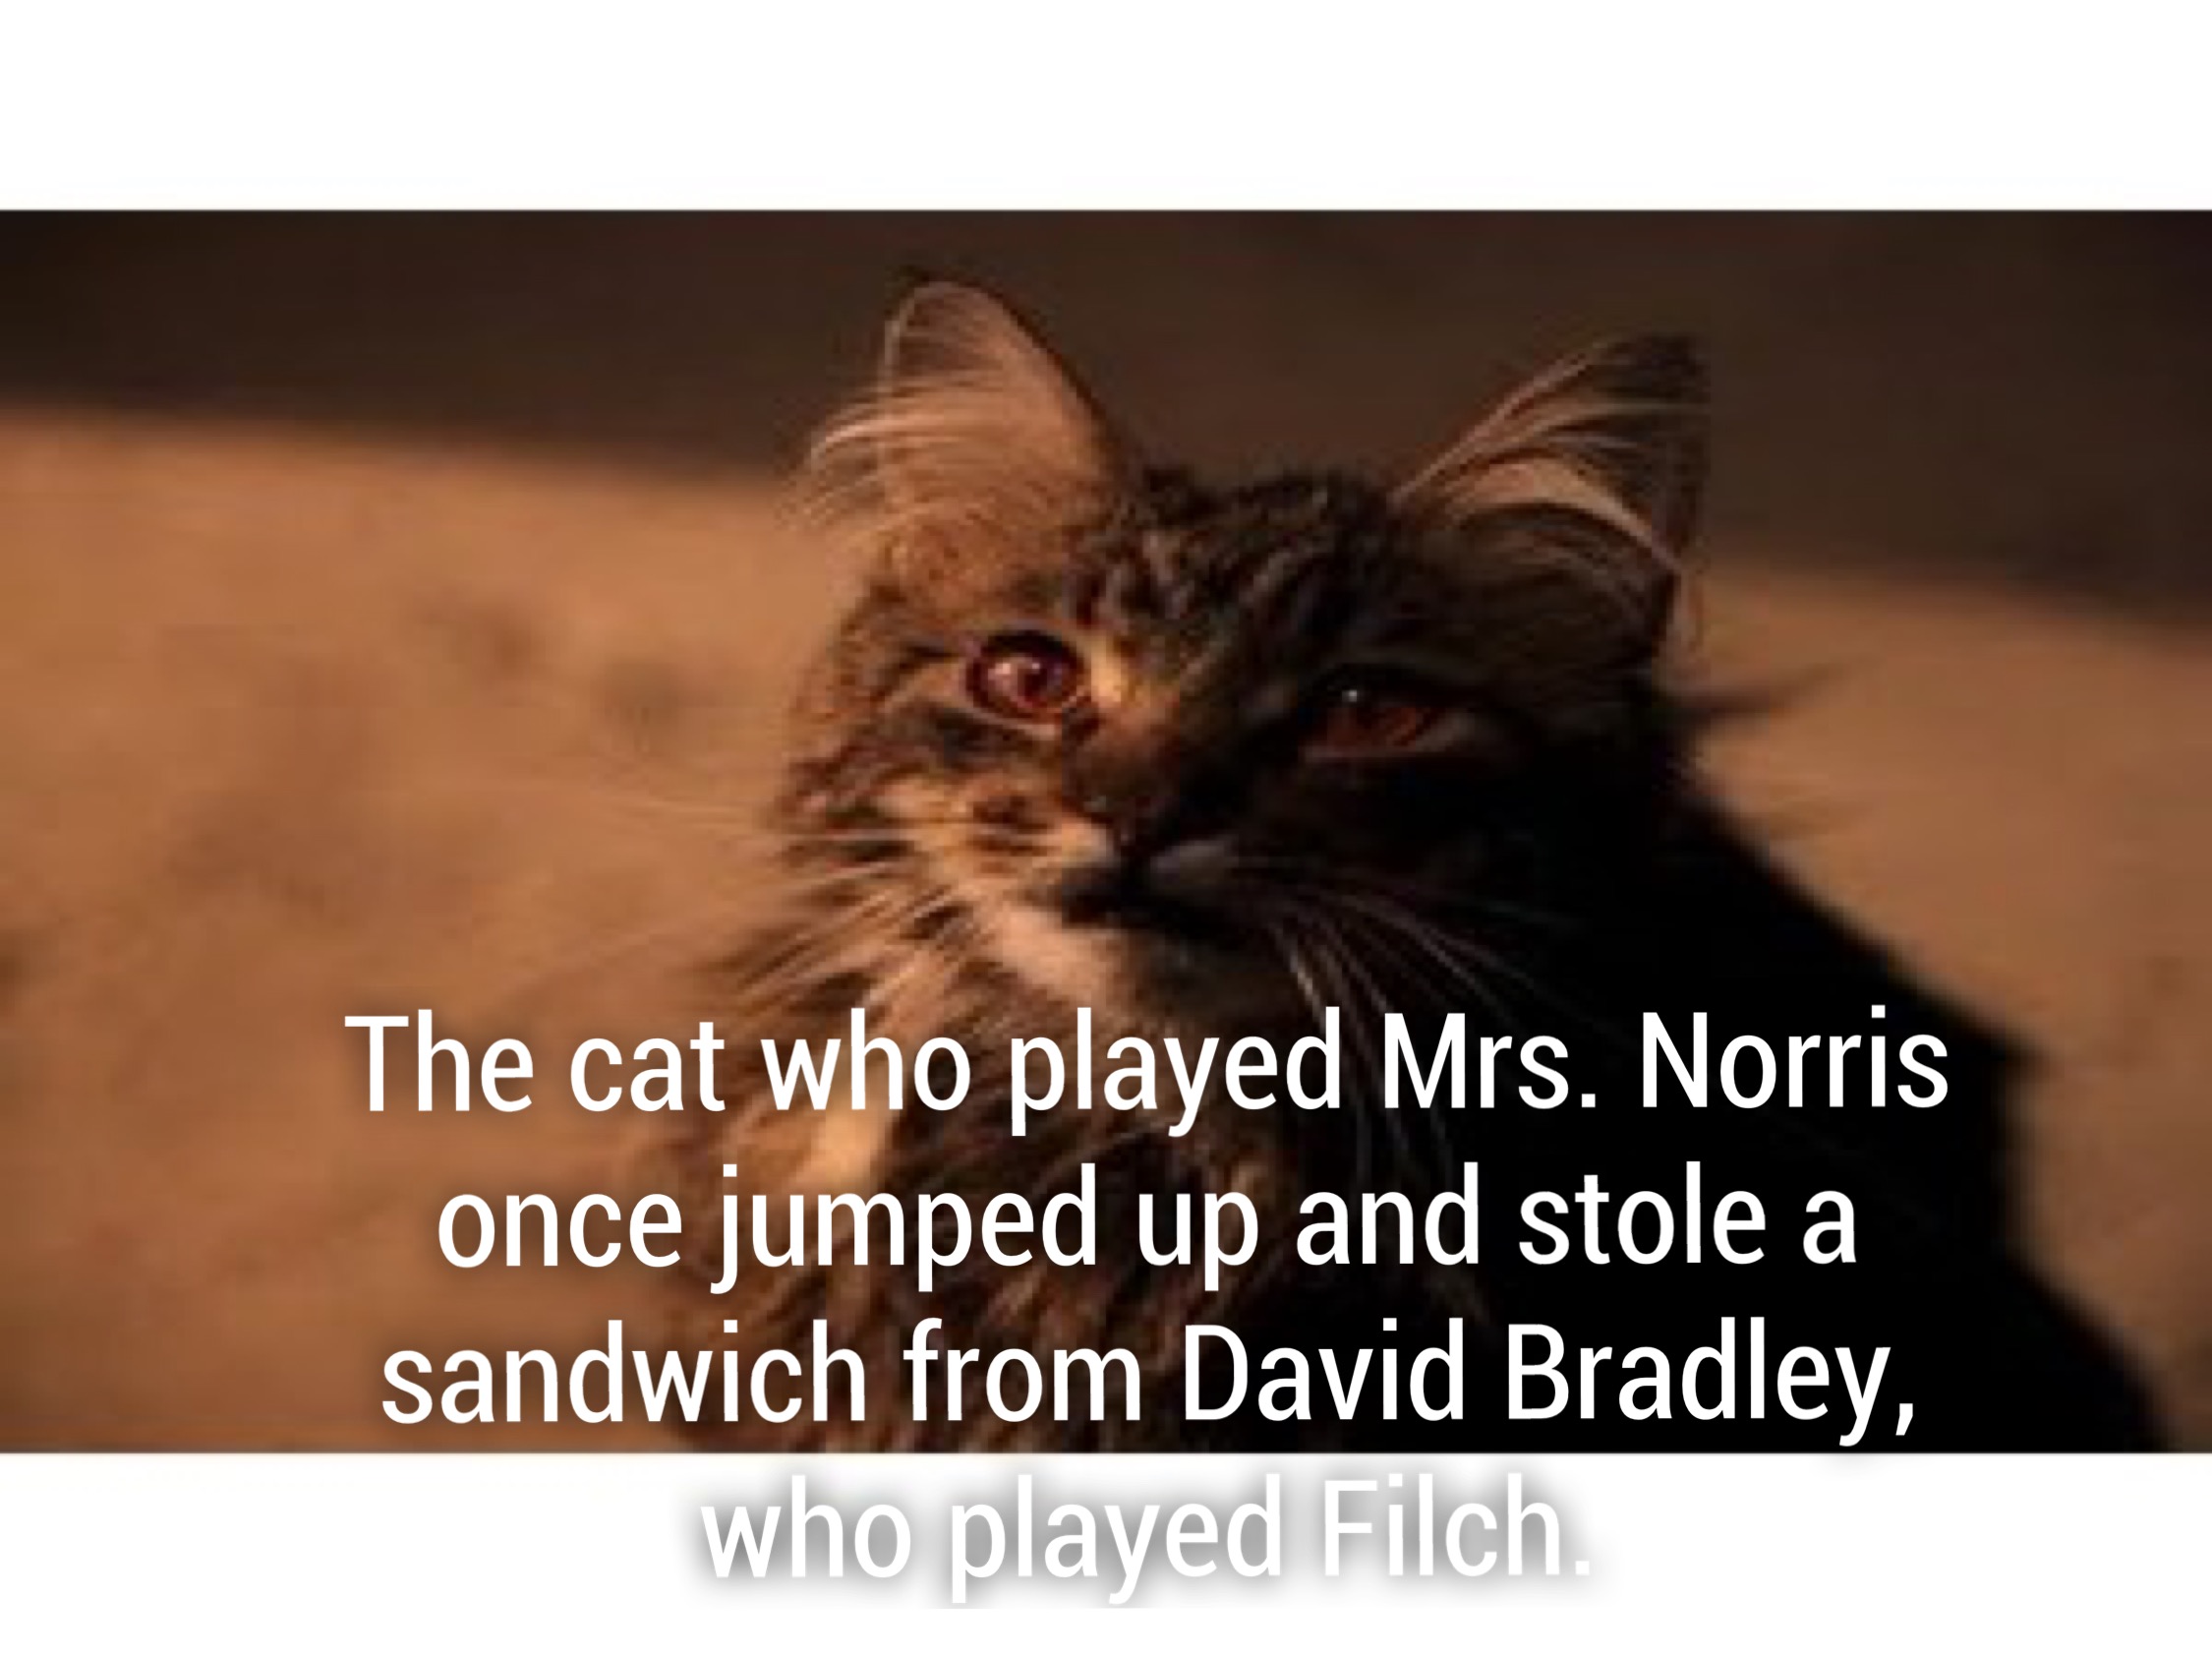 mrs norris harry potter - The cat who played Mrs. Norris once jumped up and stole a sandwich from David Bradley, who played Filch